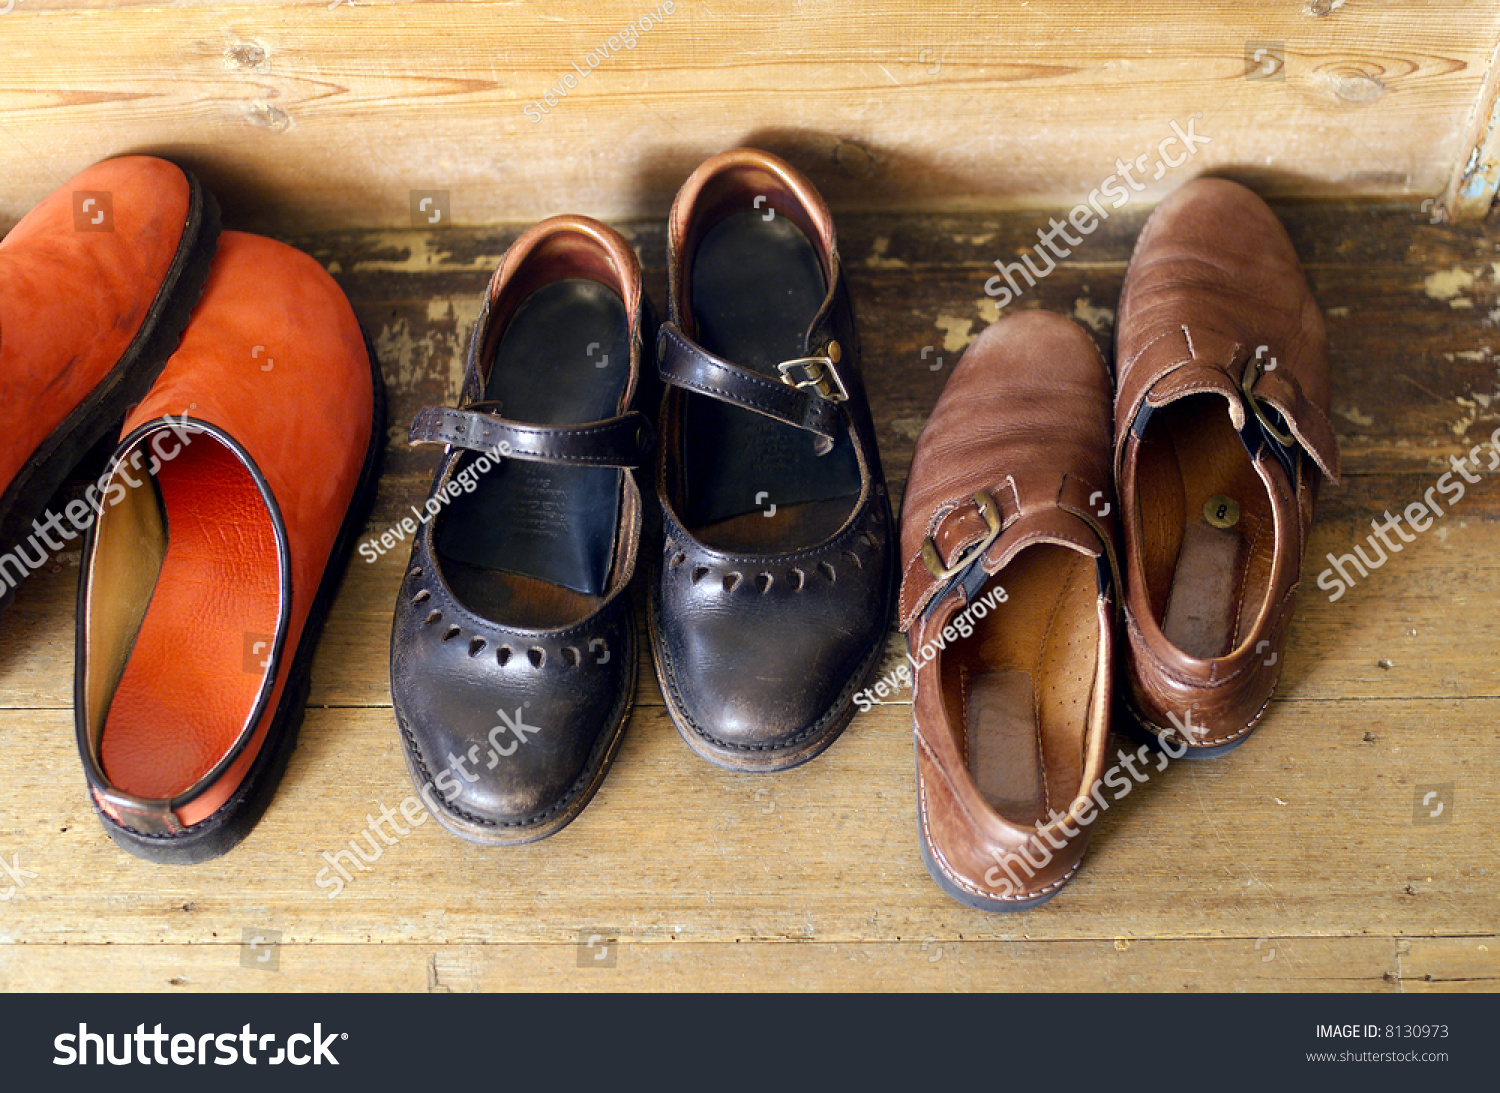 Row Of Shoes Lined Up Near House Front Door Stock Photo 8130973 ...